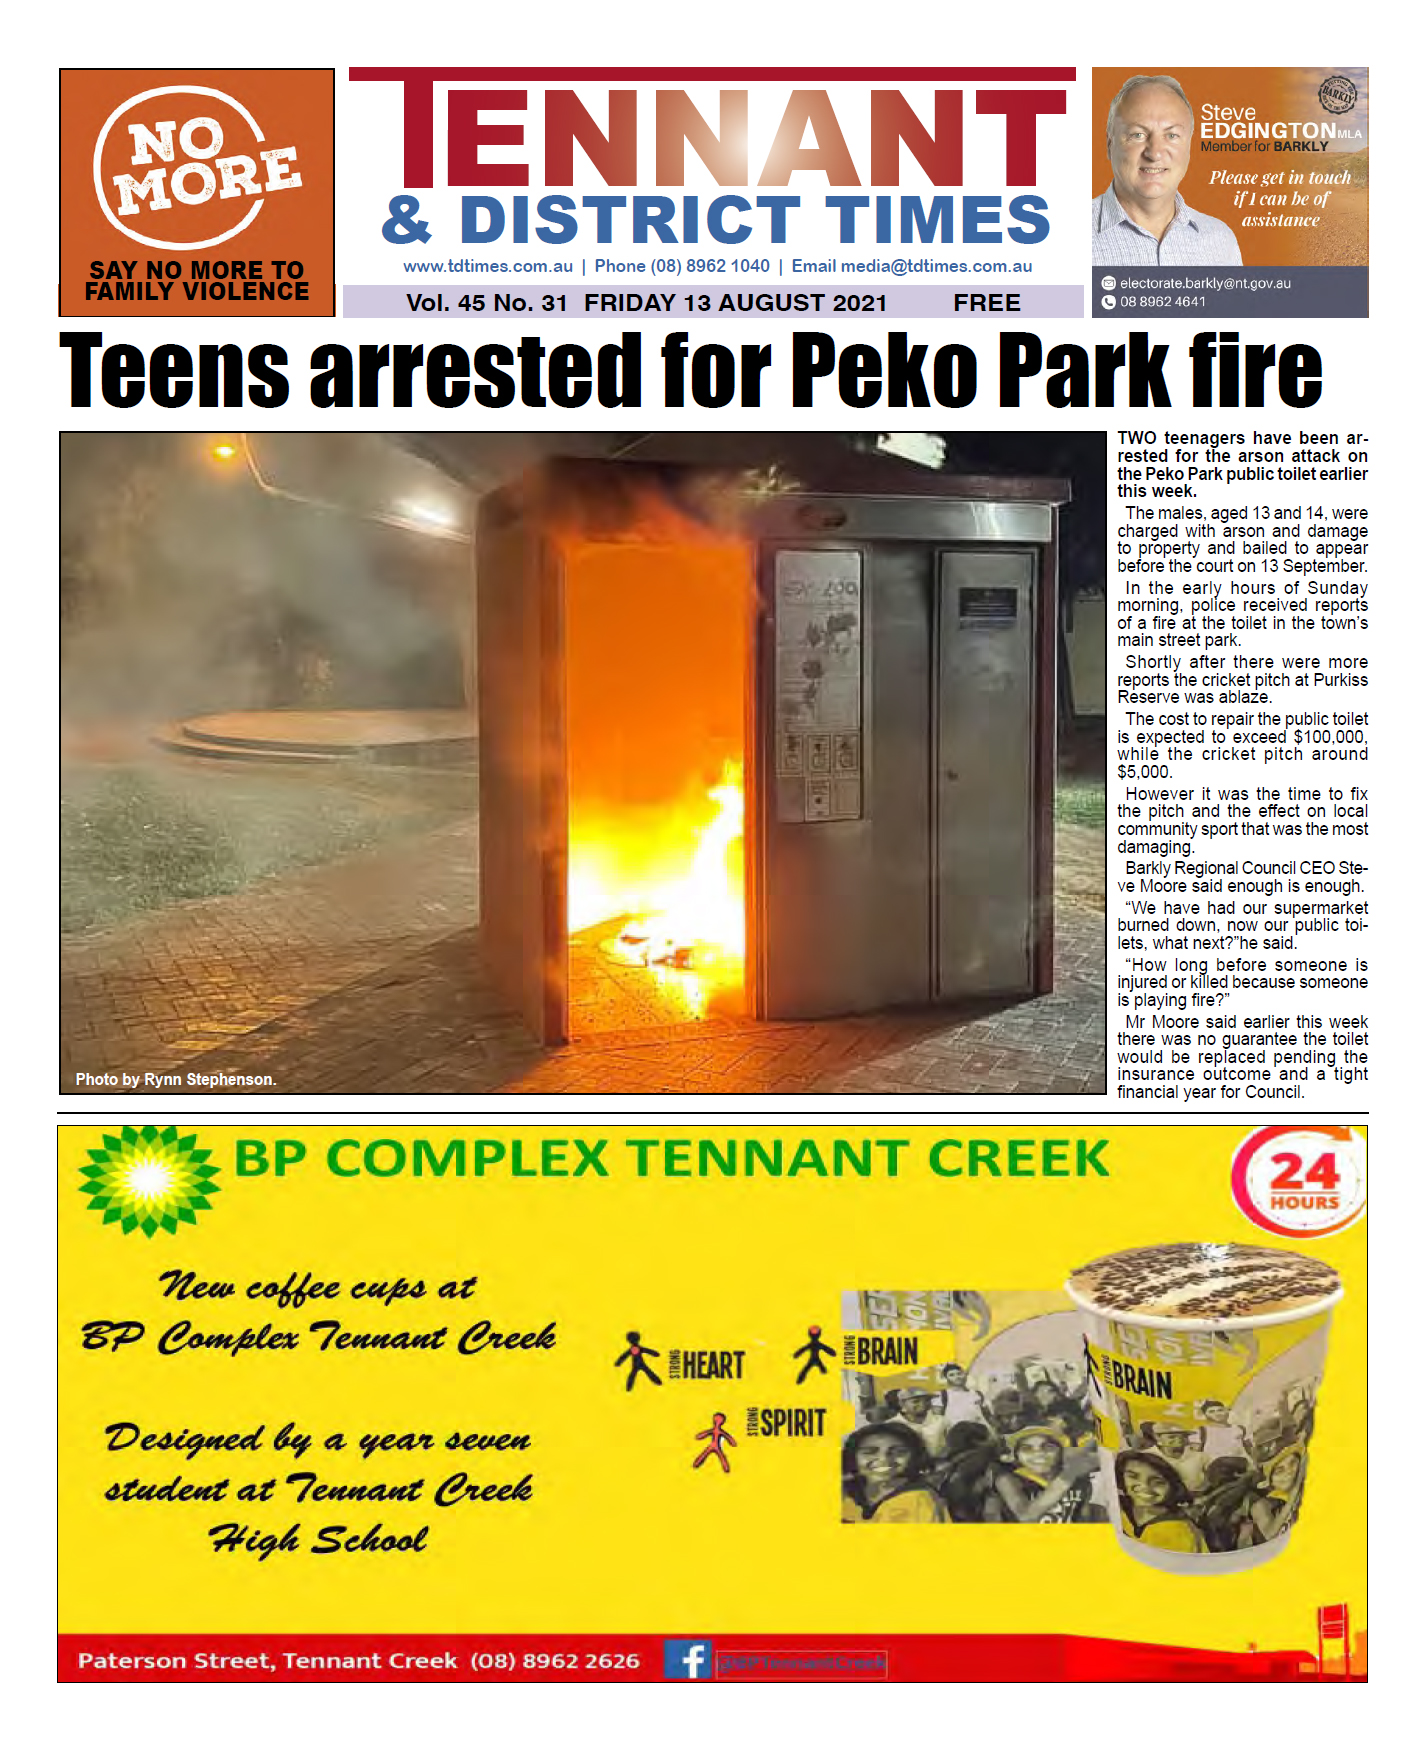 Tennant & District Times 13 August 2021